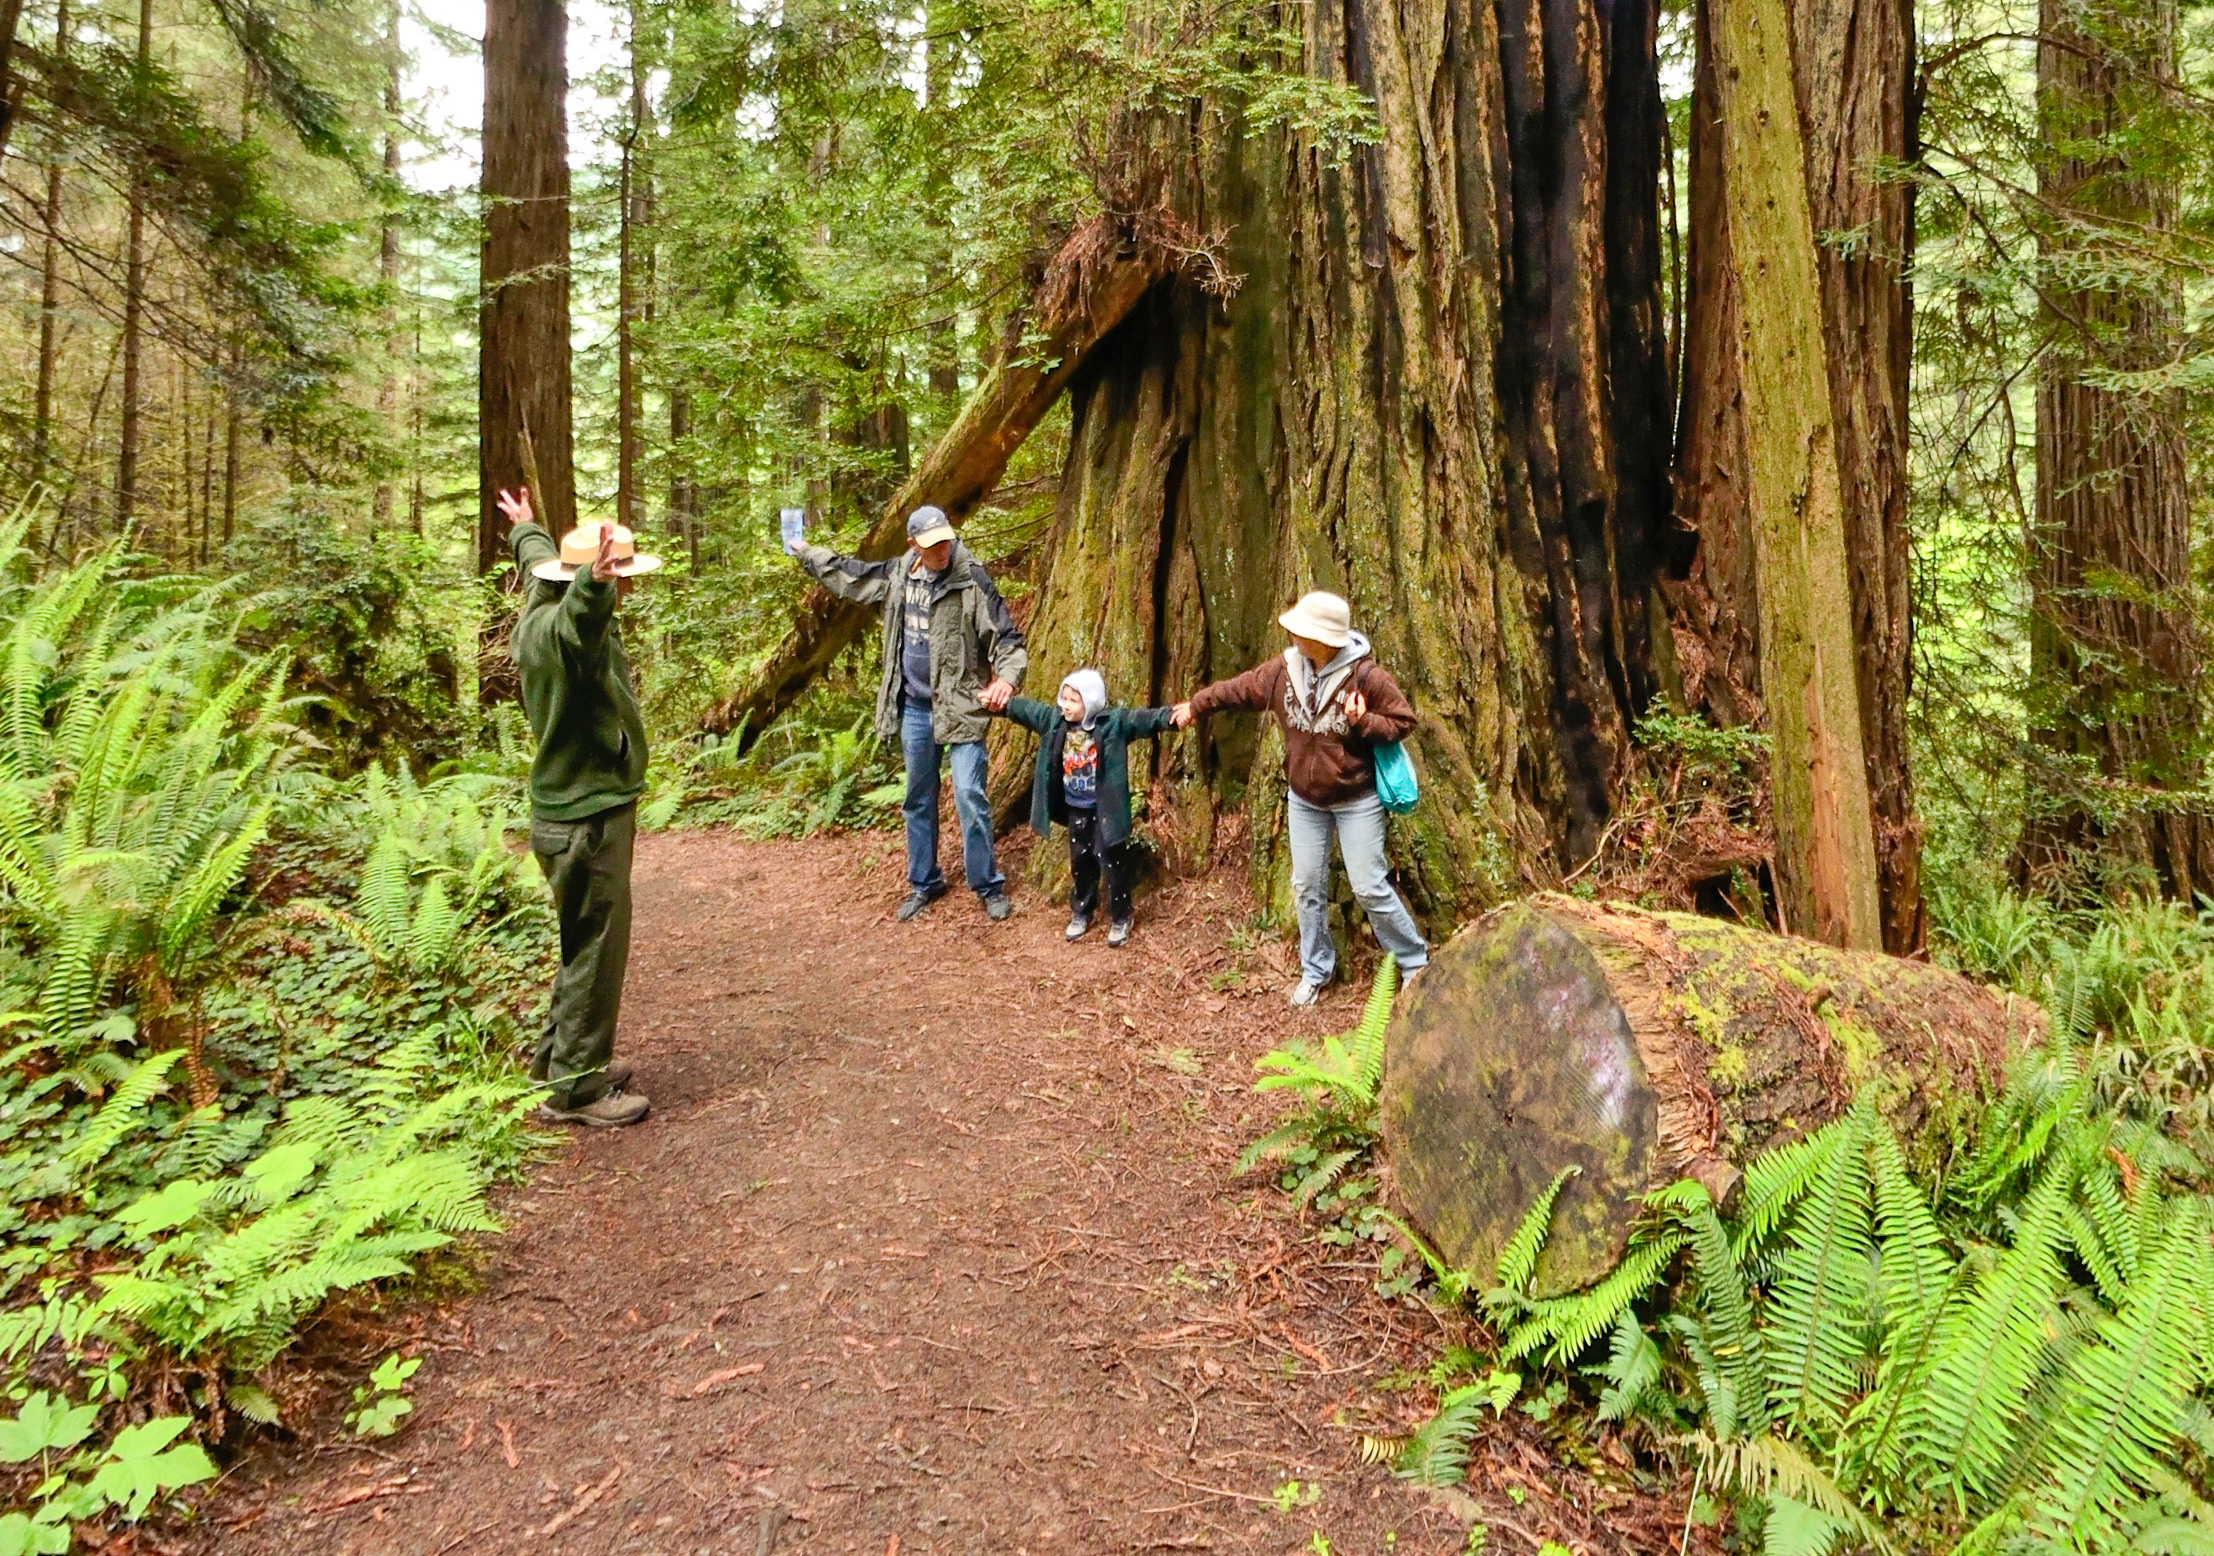 Two adults and a child stand next to a tree while a ranger nearby opens his arms wide.